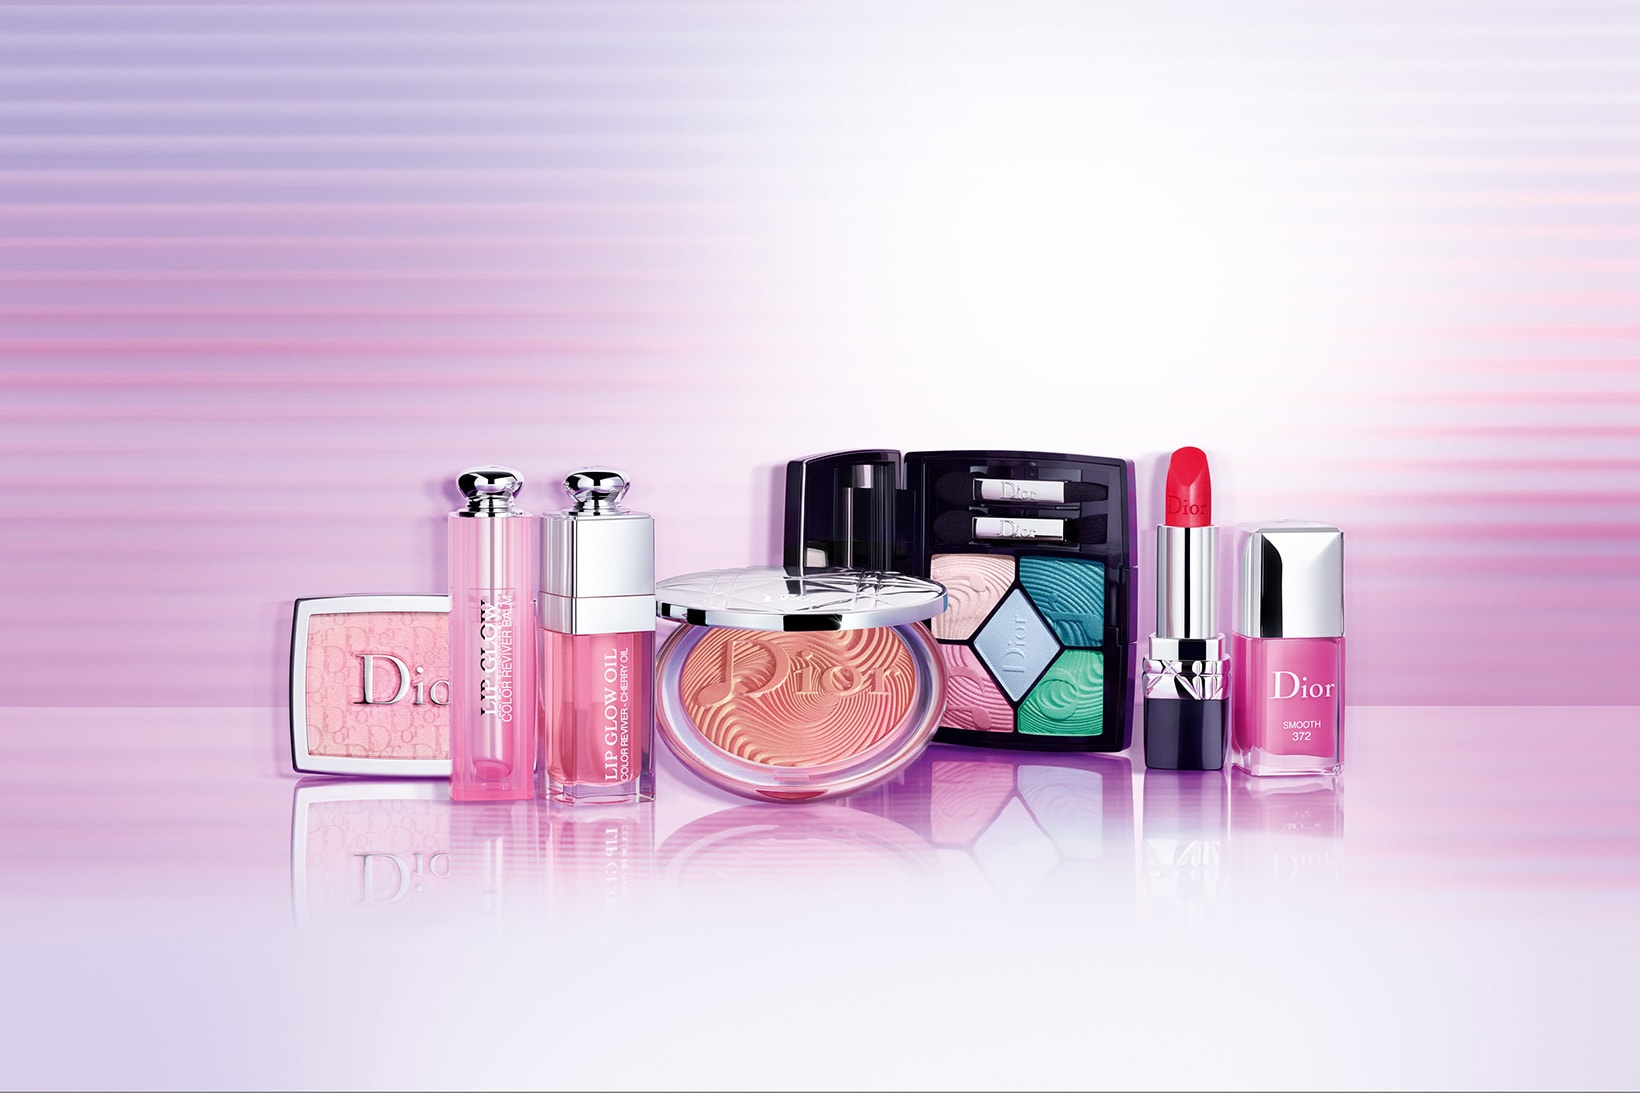 Dior Beauty "Glow Vibes" Spring Summer 2020 Makeup Collection